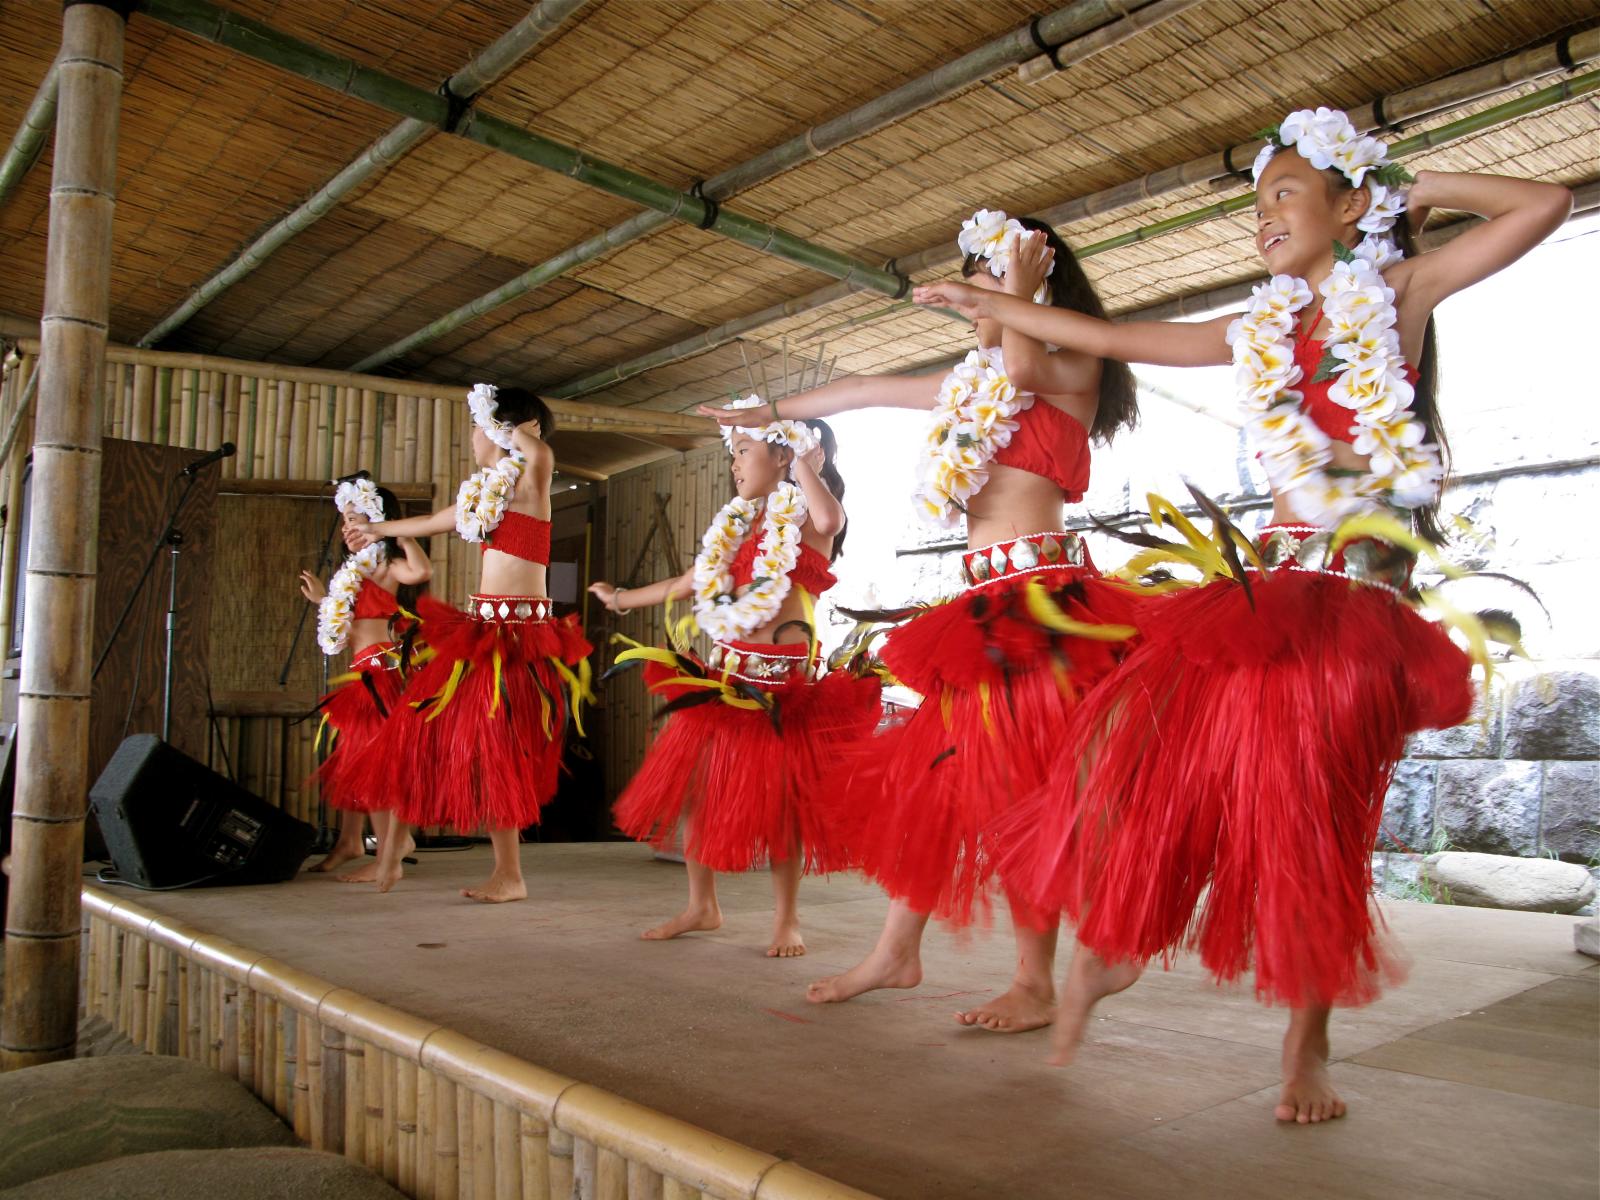 children wearing grass skirts and hula skirts dancing at the park